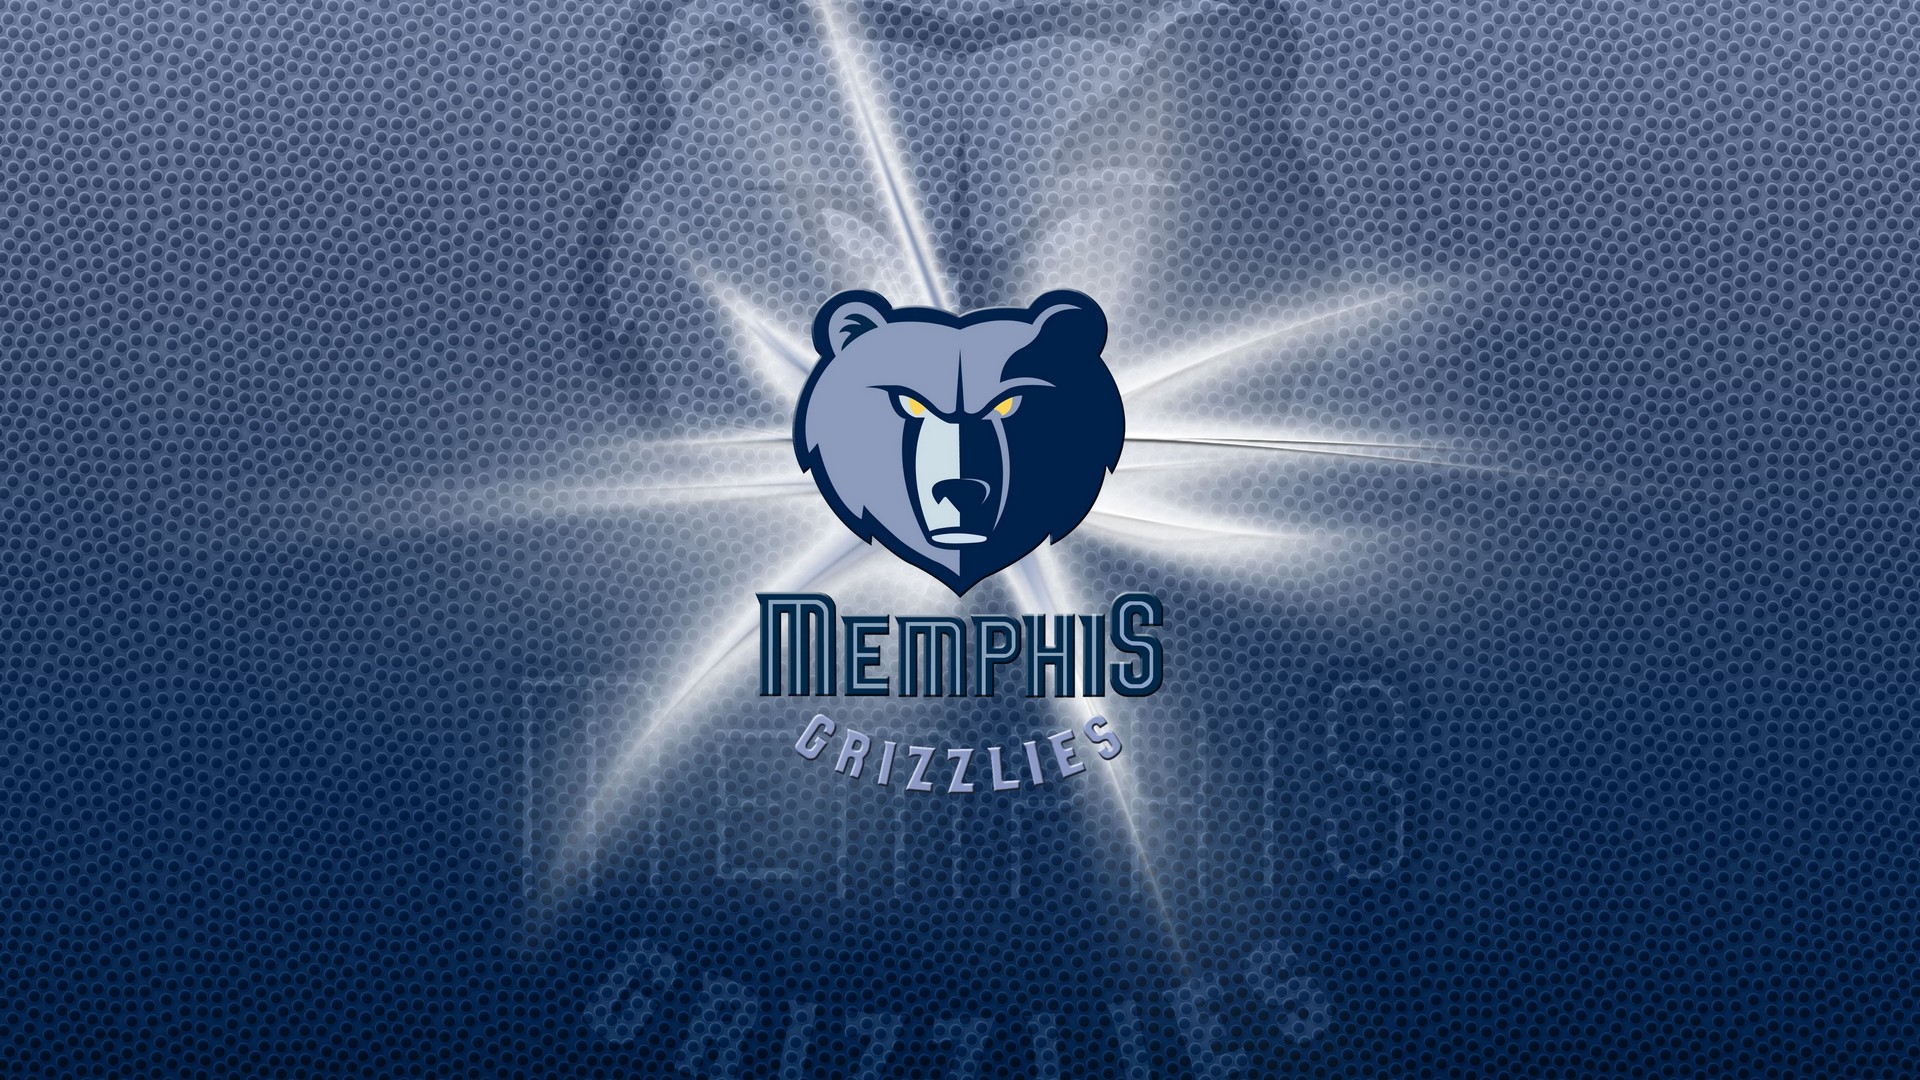 Wallpapers HD Memphis Grizzlies with high-resolution 1920x1080 pixel. You can use this wallpaper for your Desktop Computer Backgrounds, Windows or Mac Screensavers, iPhone Lock screen, Tablet or Android and another Mobile Phone device